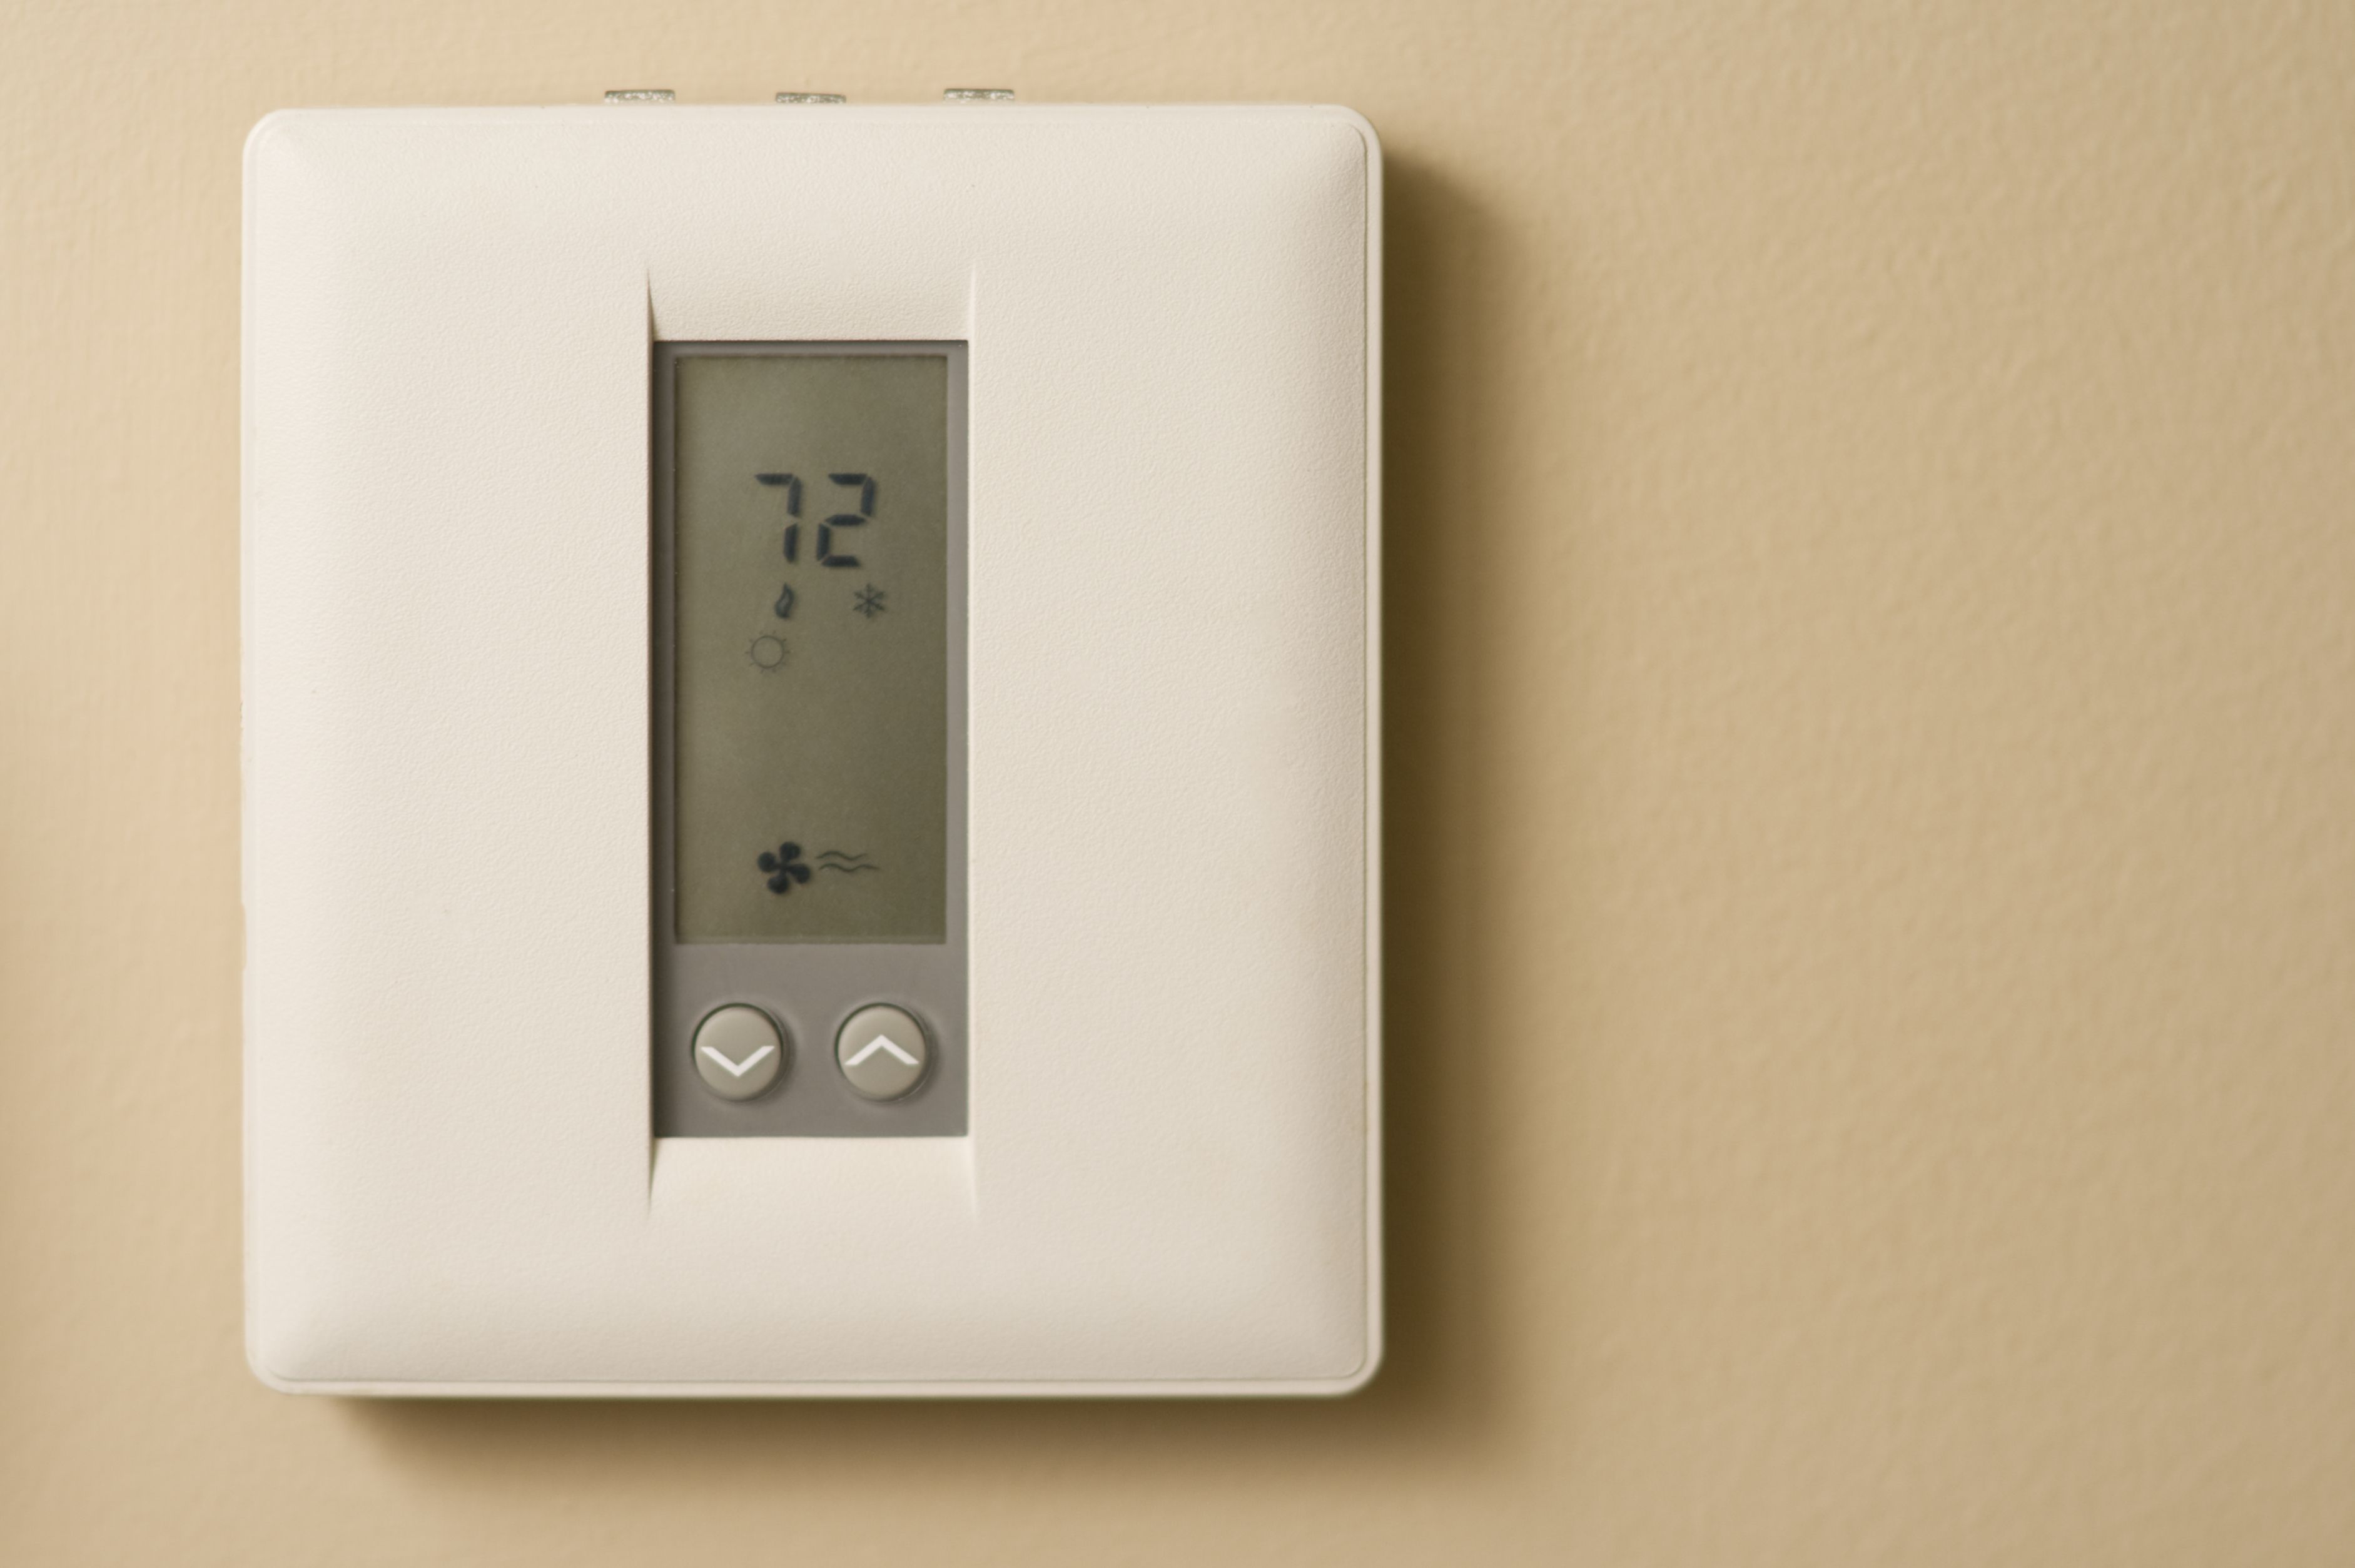 5 Reasons Your Thermostat Isn't Working